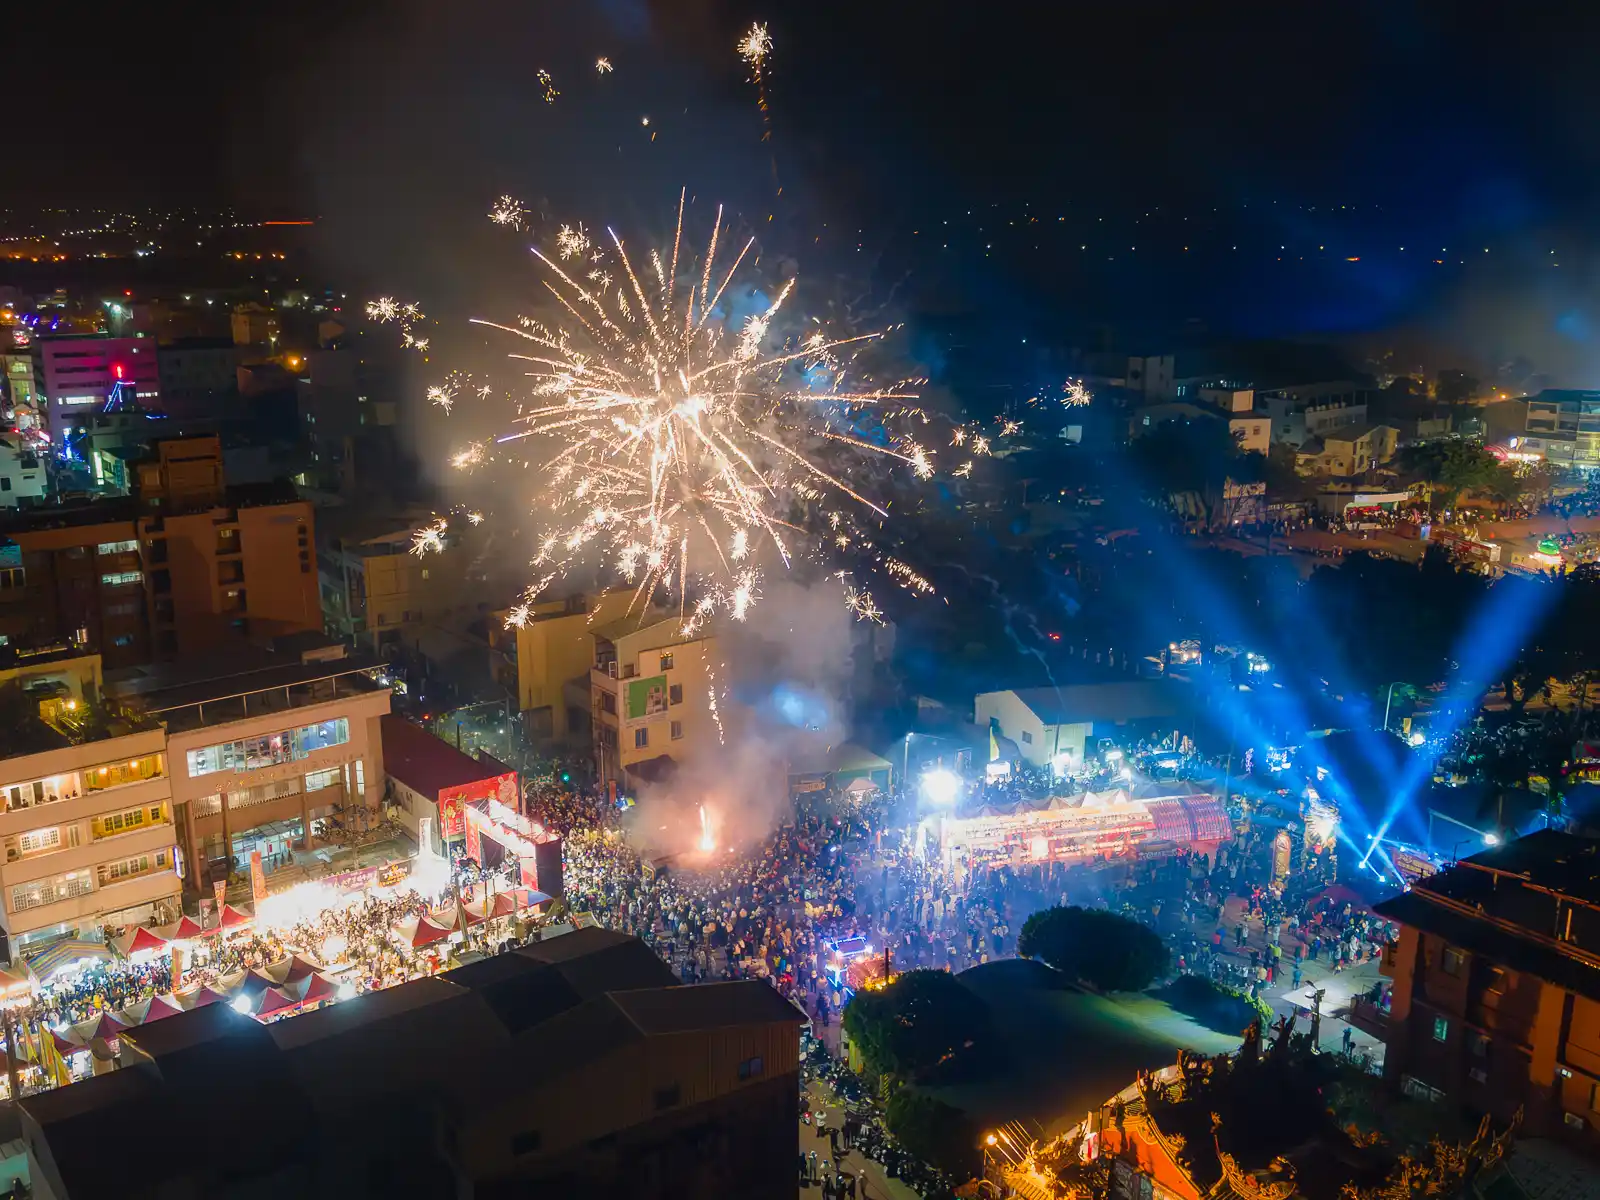 An aerial shot of the crowds and fireworks.